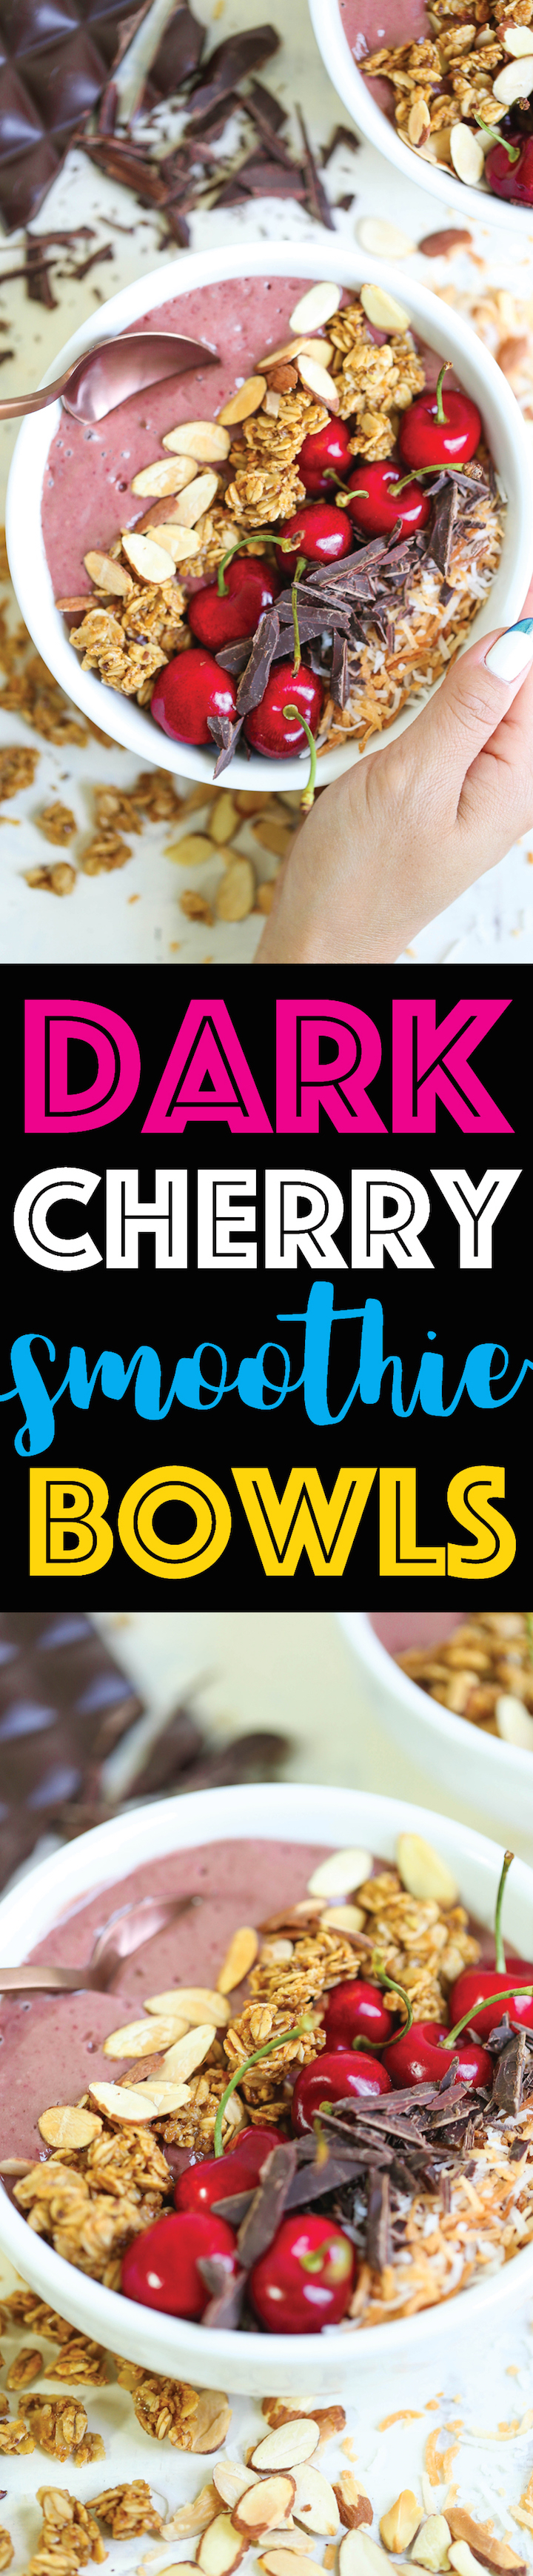 Dark Cherry Smoothie Bowls - A less-than-10-minute breakfast that hasn't been any easier, healthier or quicker! Nutrient-rich and budget-friendly!!!